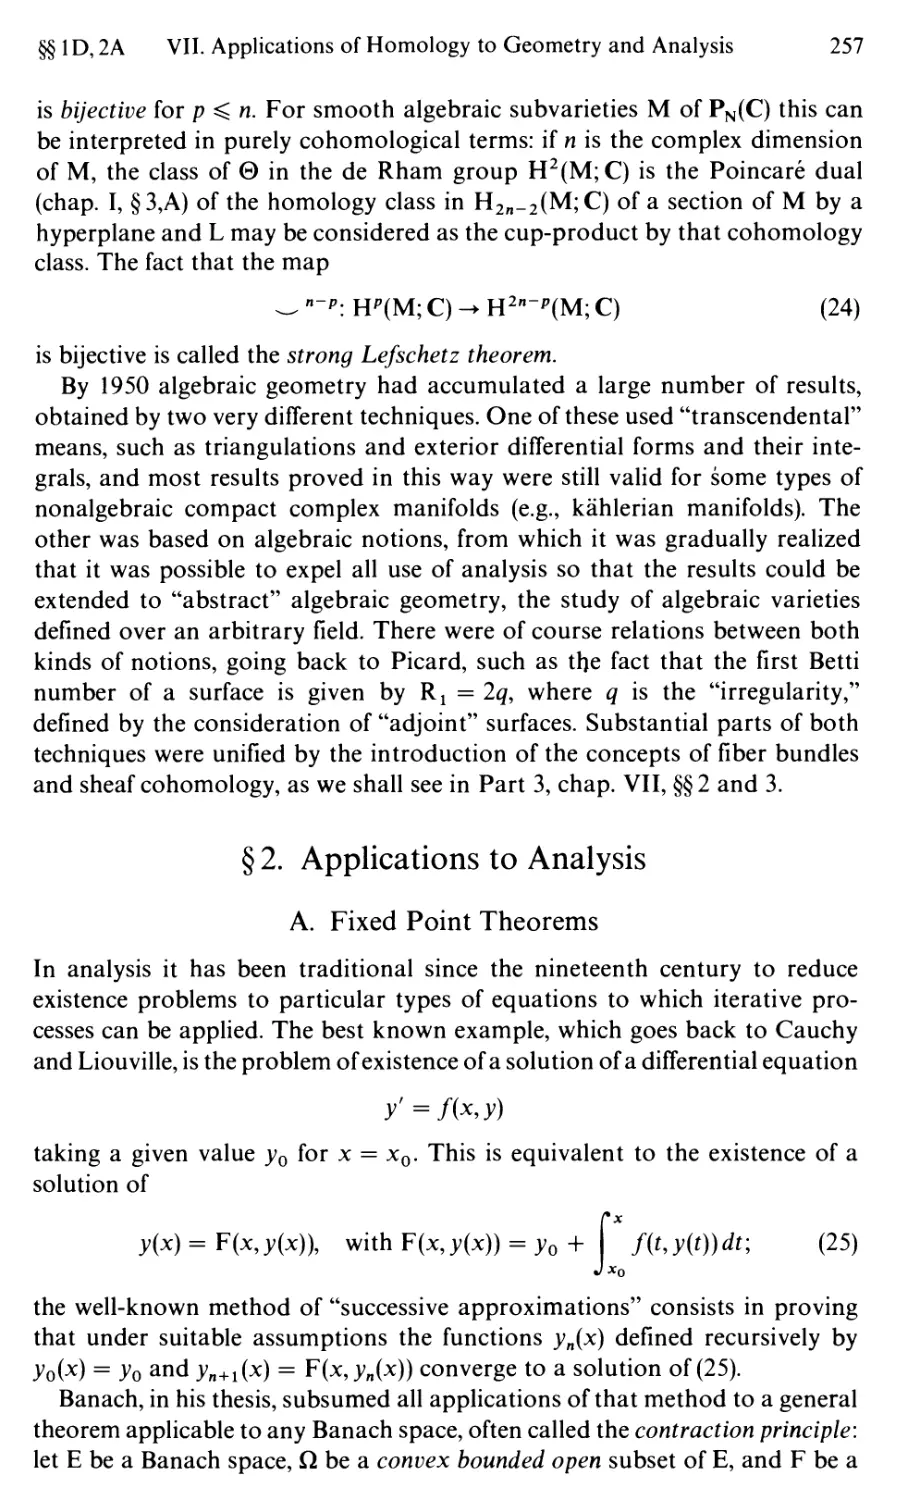 §2. Applications to Analysis